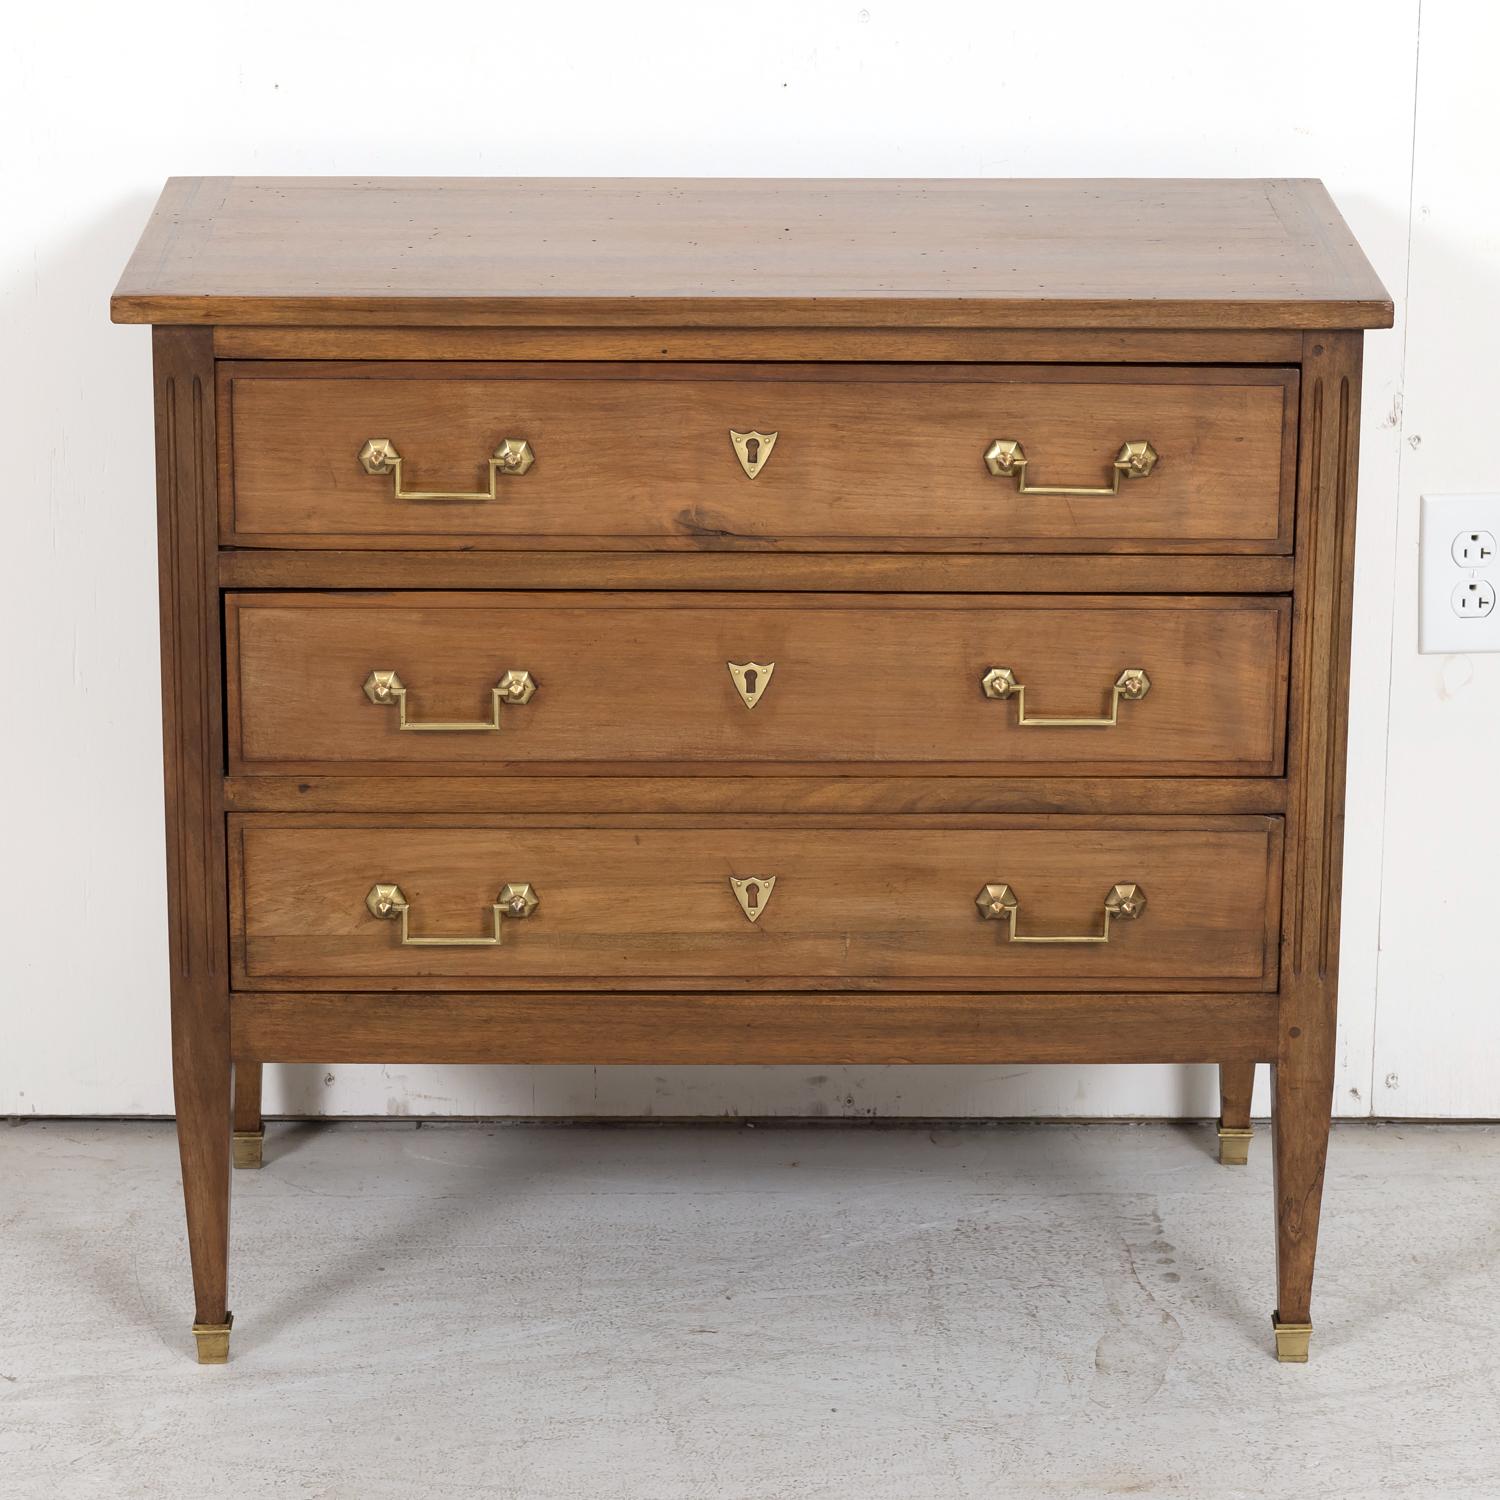 A late 19th century French Louis XVI style petite commode handcrafted of walnut by talented artisans in the port city of Bordeaux, circa 1880s, having a rectangular top with a marquetry band sitting above three drawers adorned with original